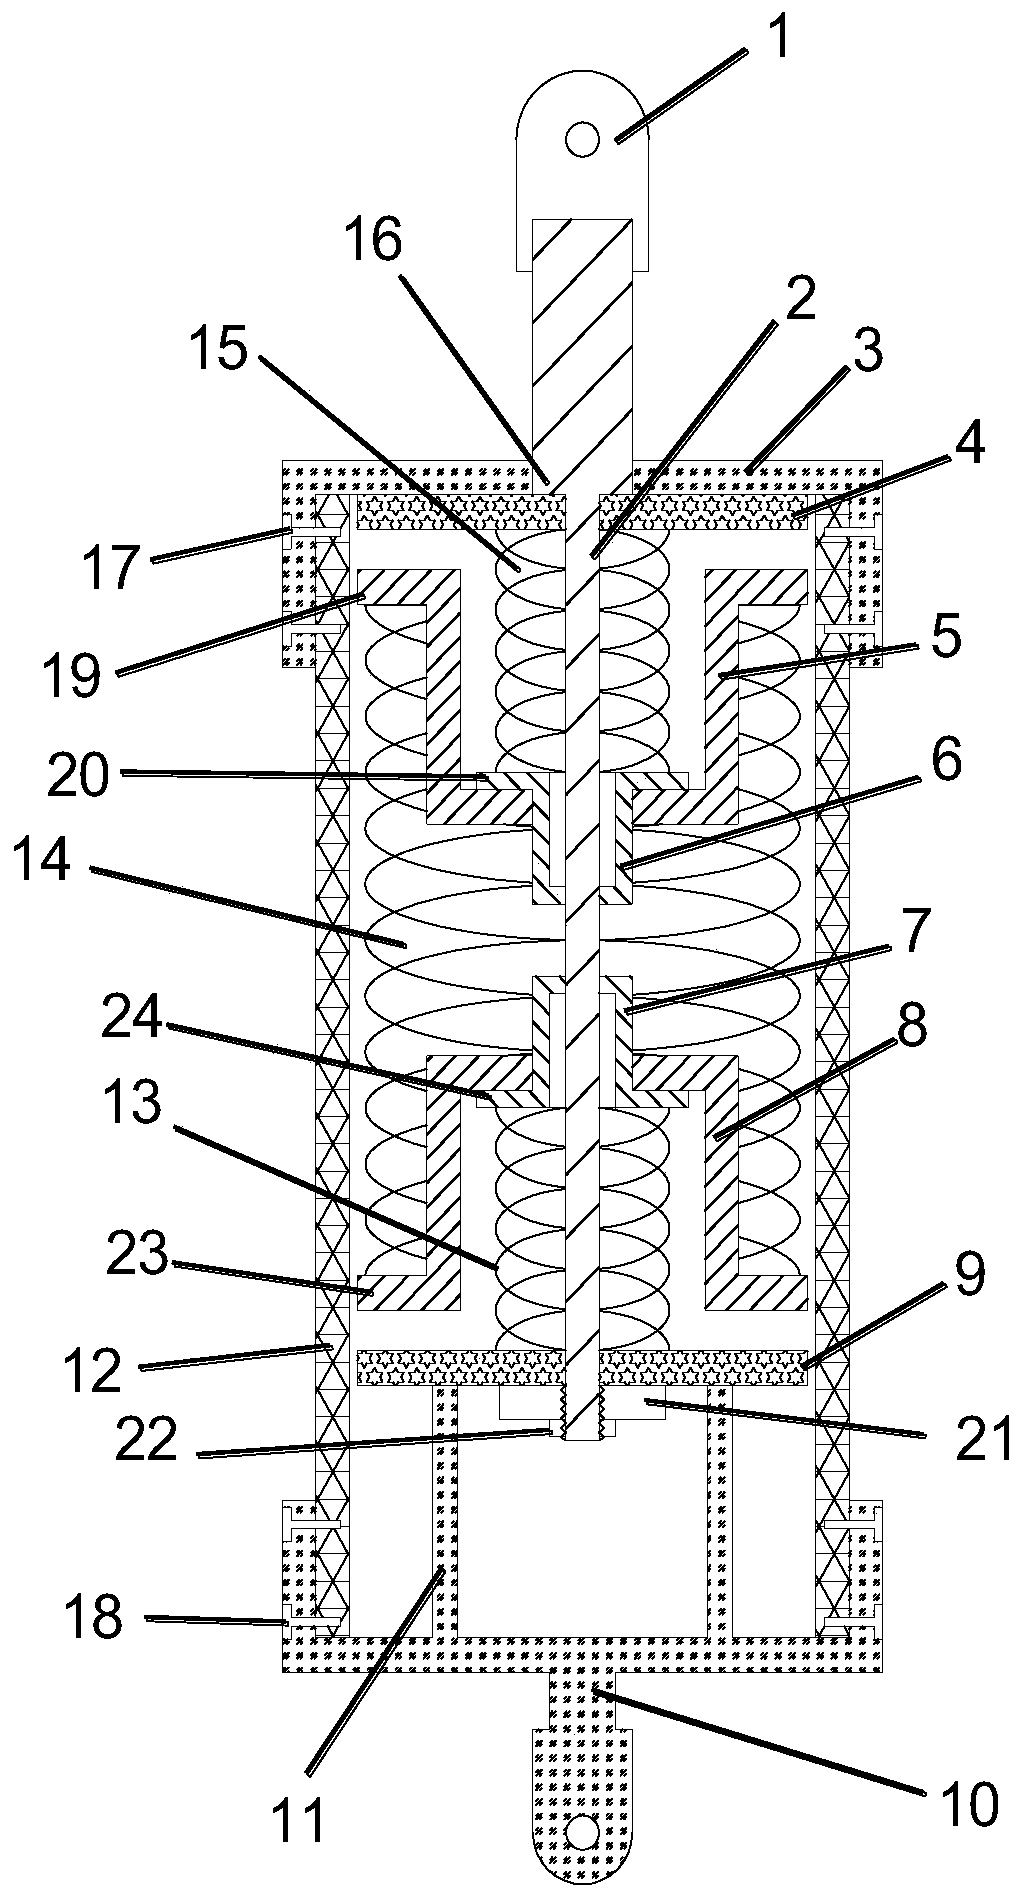 Self-resetting device with capacity of multi-stage rigidity self-adjustment